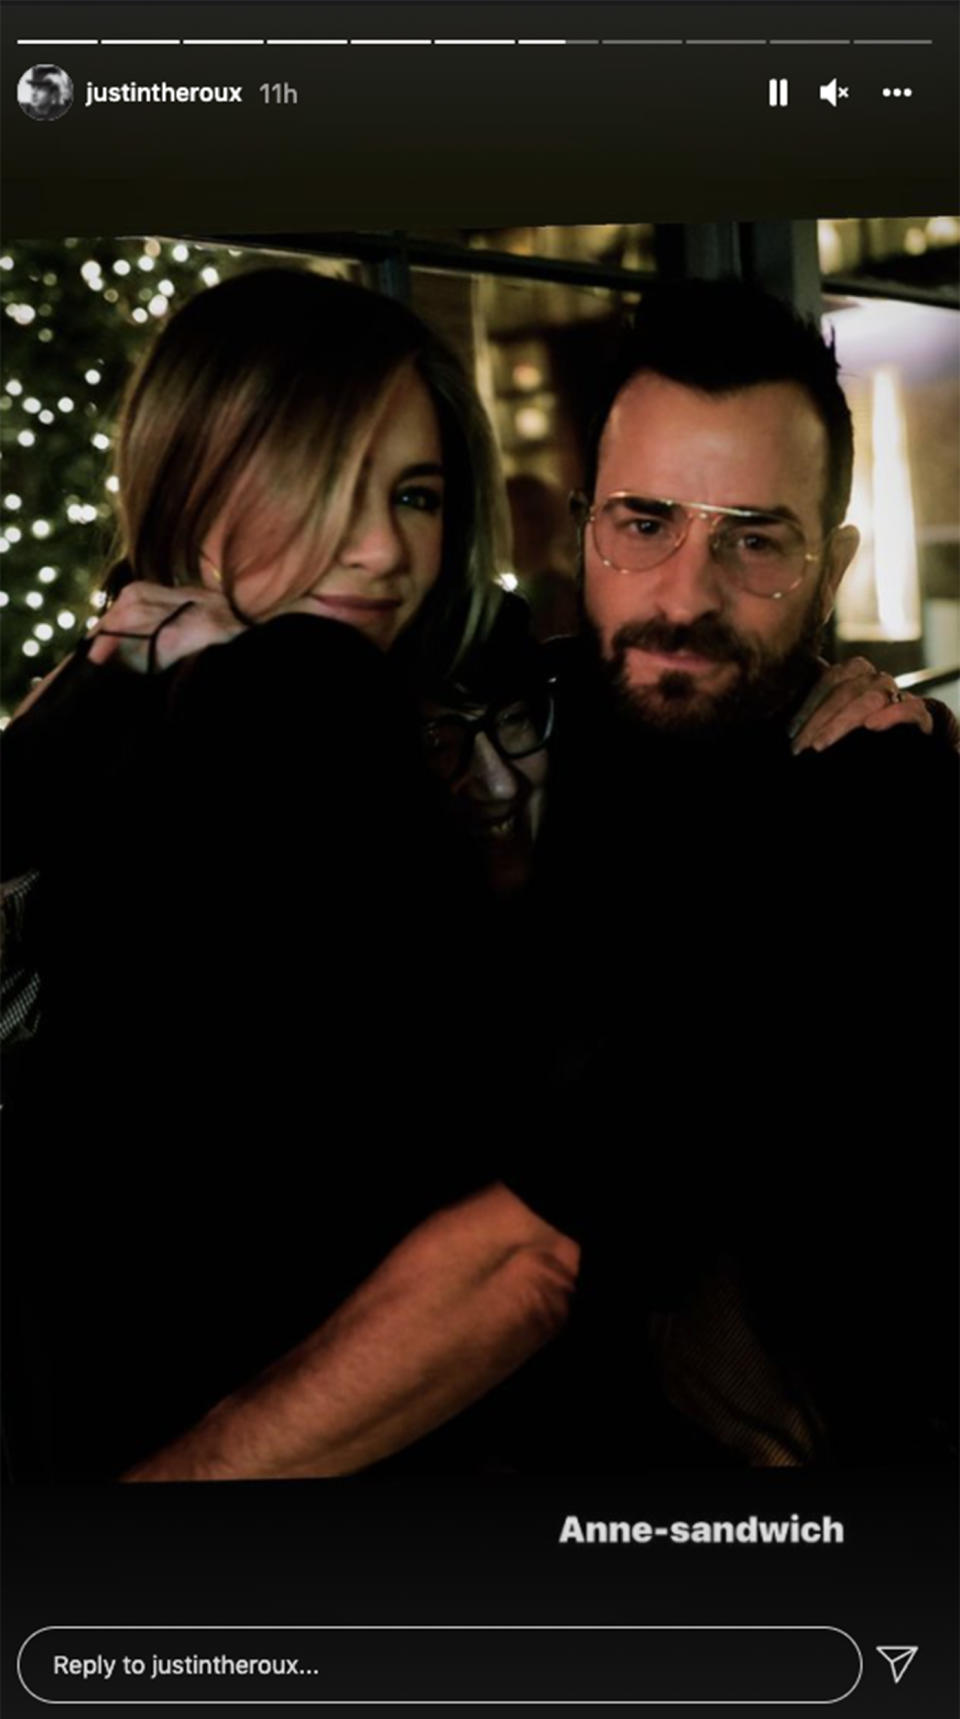 Aniston and Theroux are still friendly after their split in 2018. (JenniferAniston / Instagram)